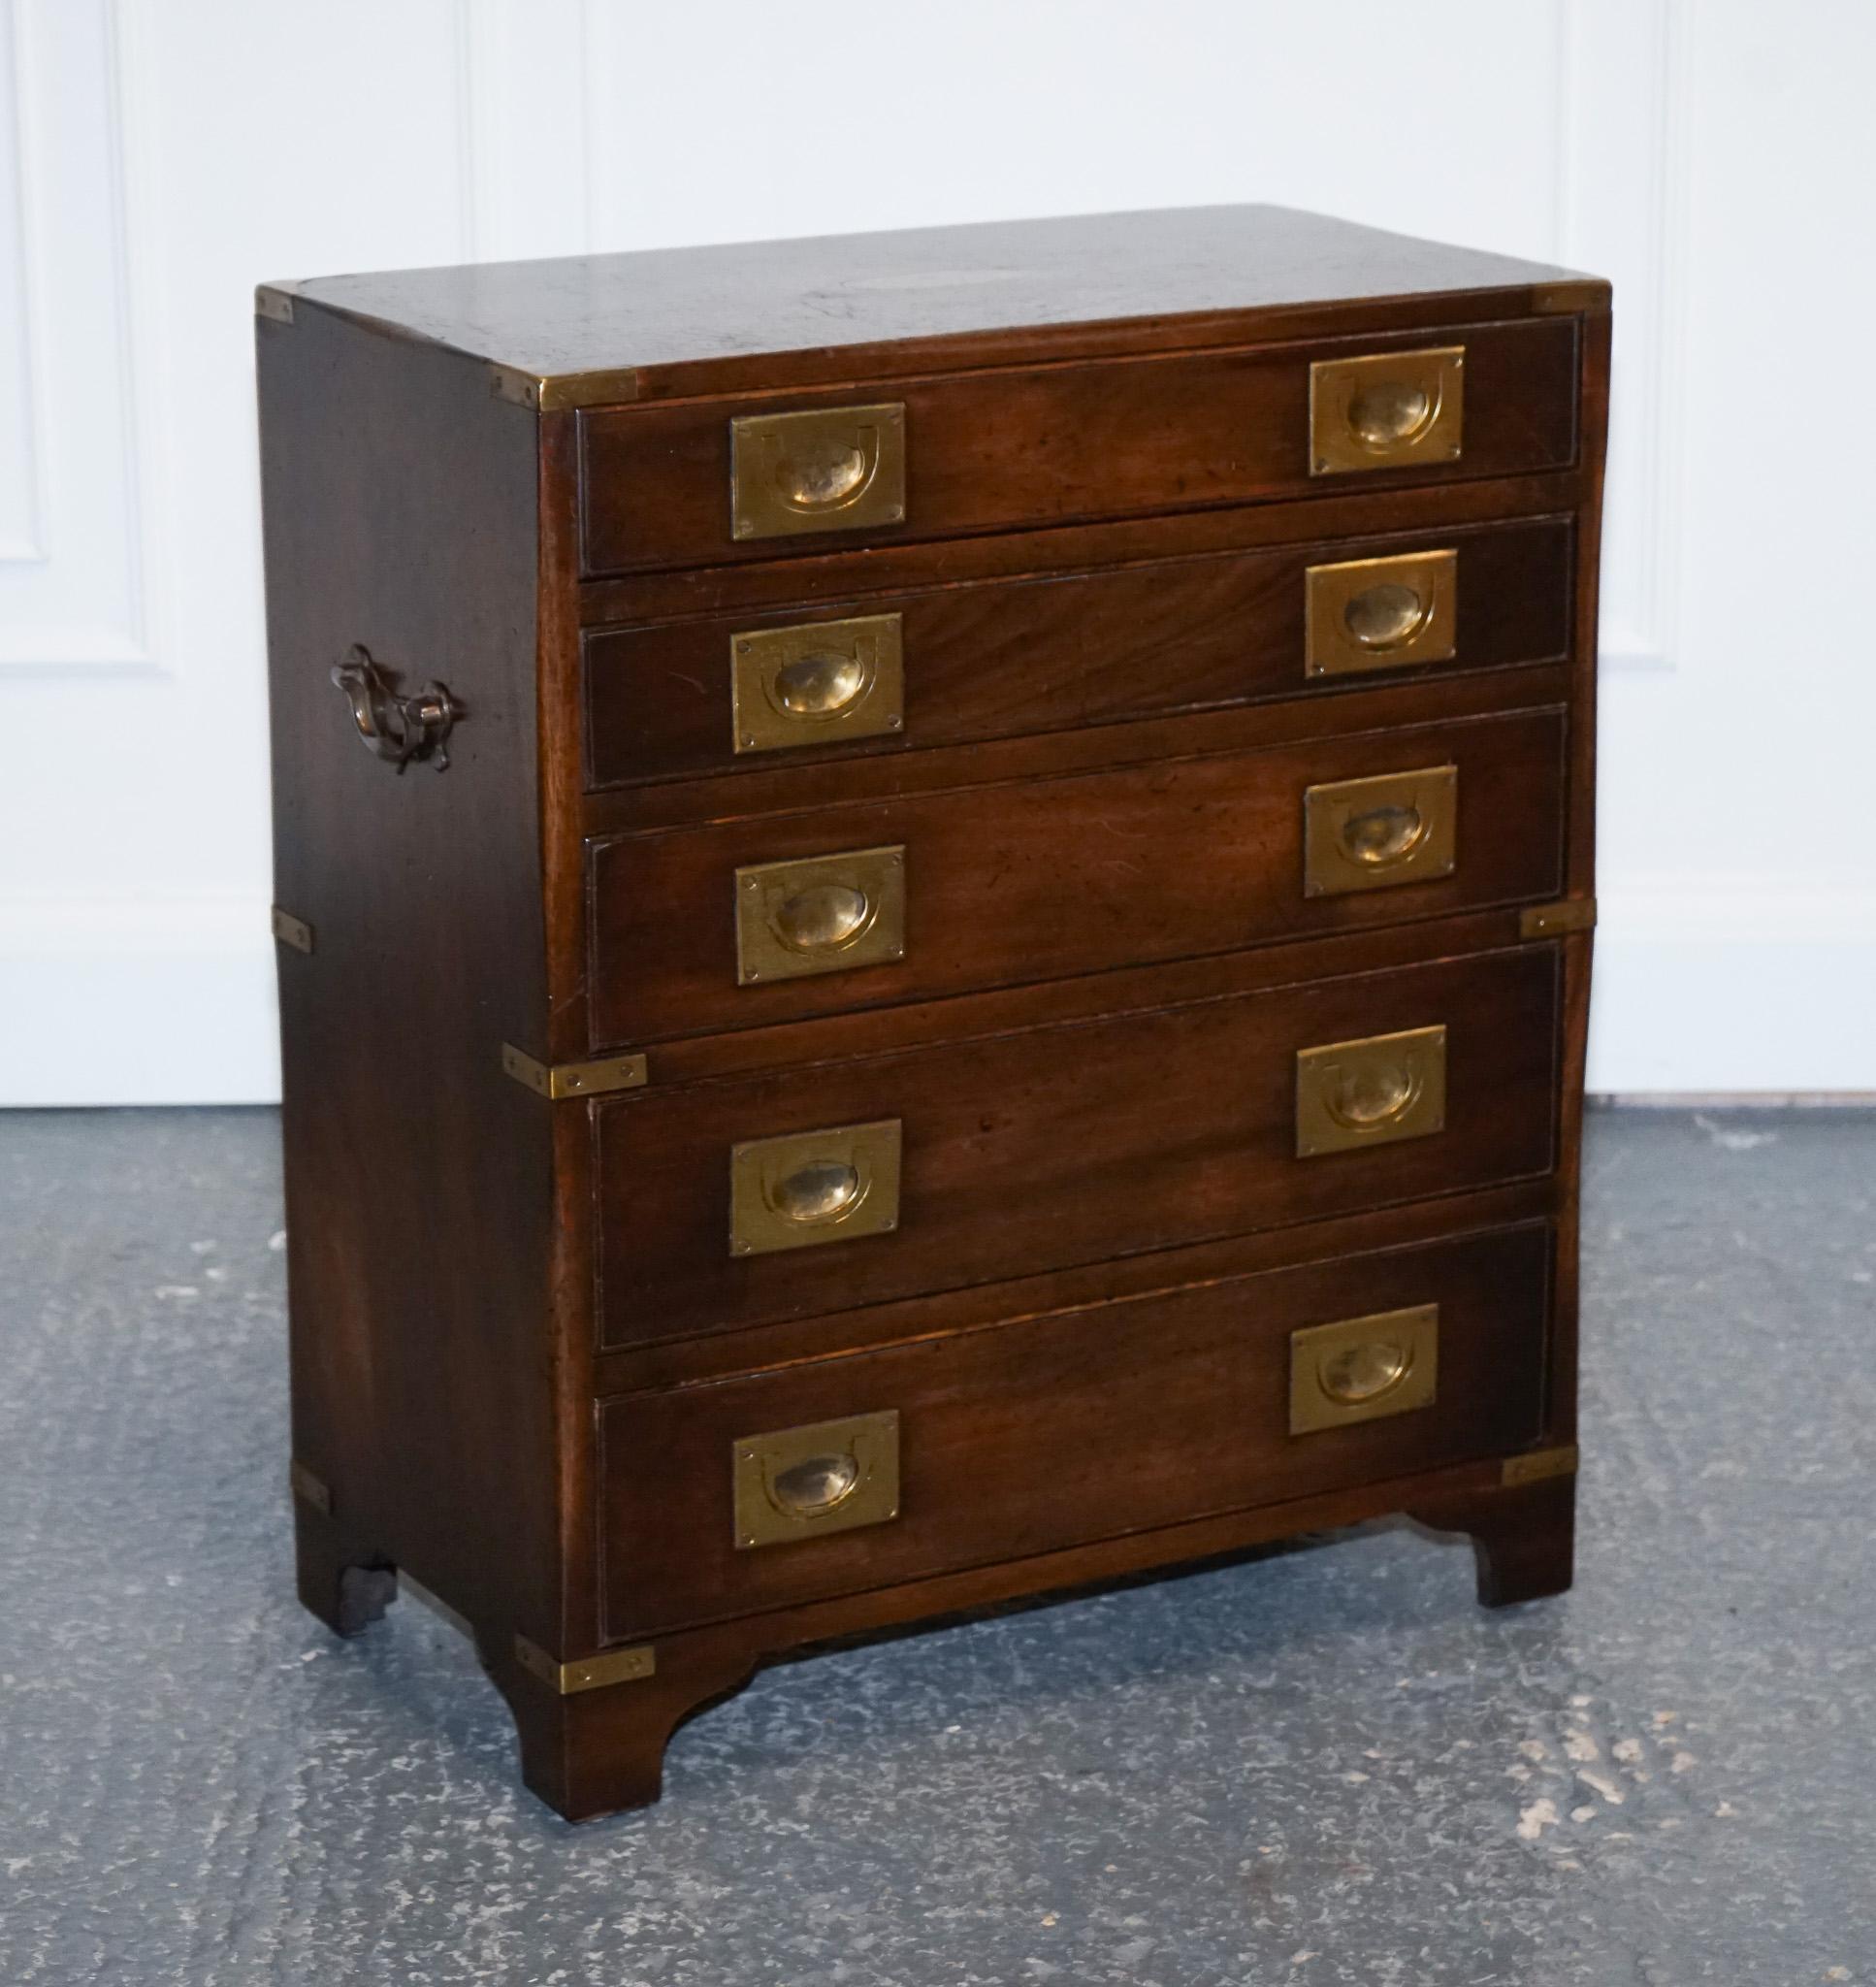 We are delighted to offer for sale this Beautiful Vintage Kennedy for Harrods Campaign.

This vintage Harrods Kennedy military campaign chest of drawers is a stunning piece of furniture that exudes timeless elegance. It features five graduated